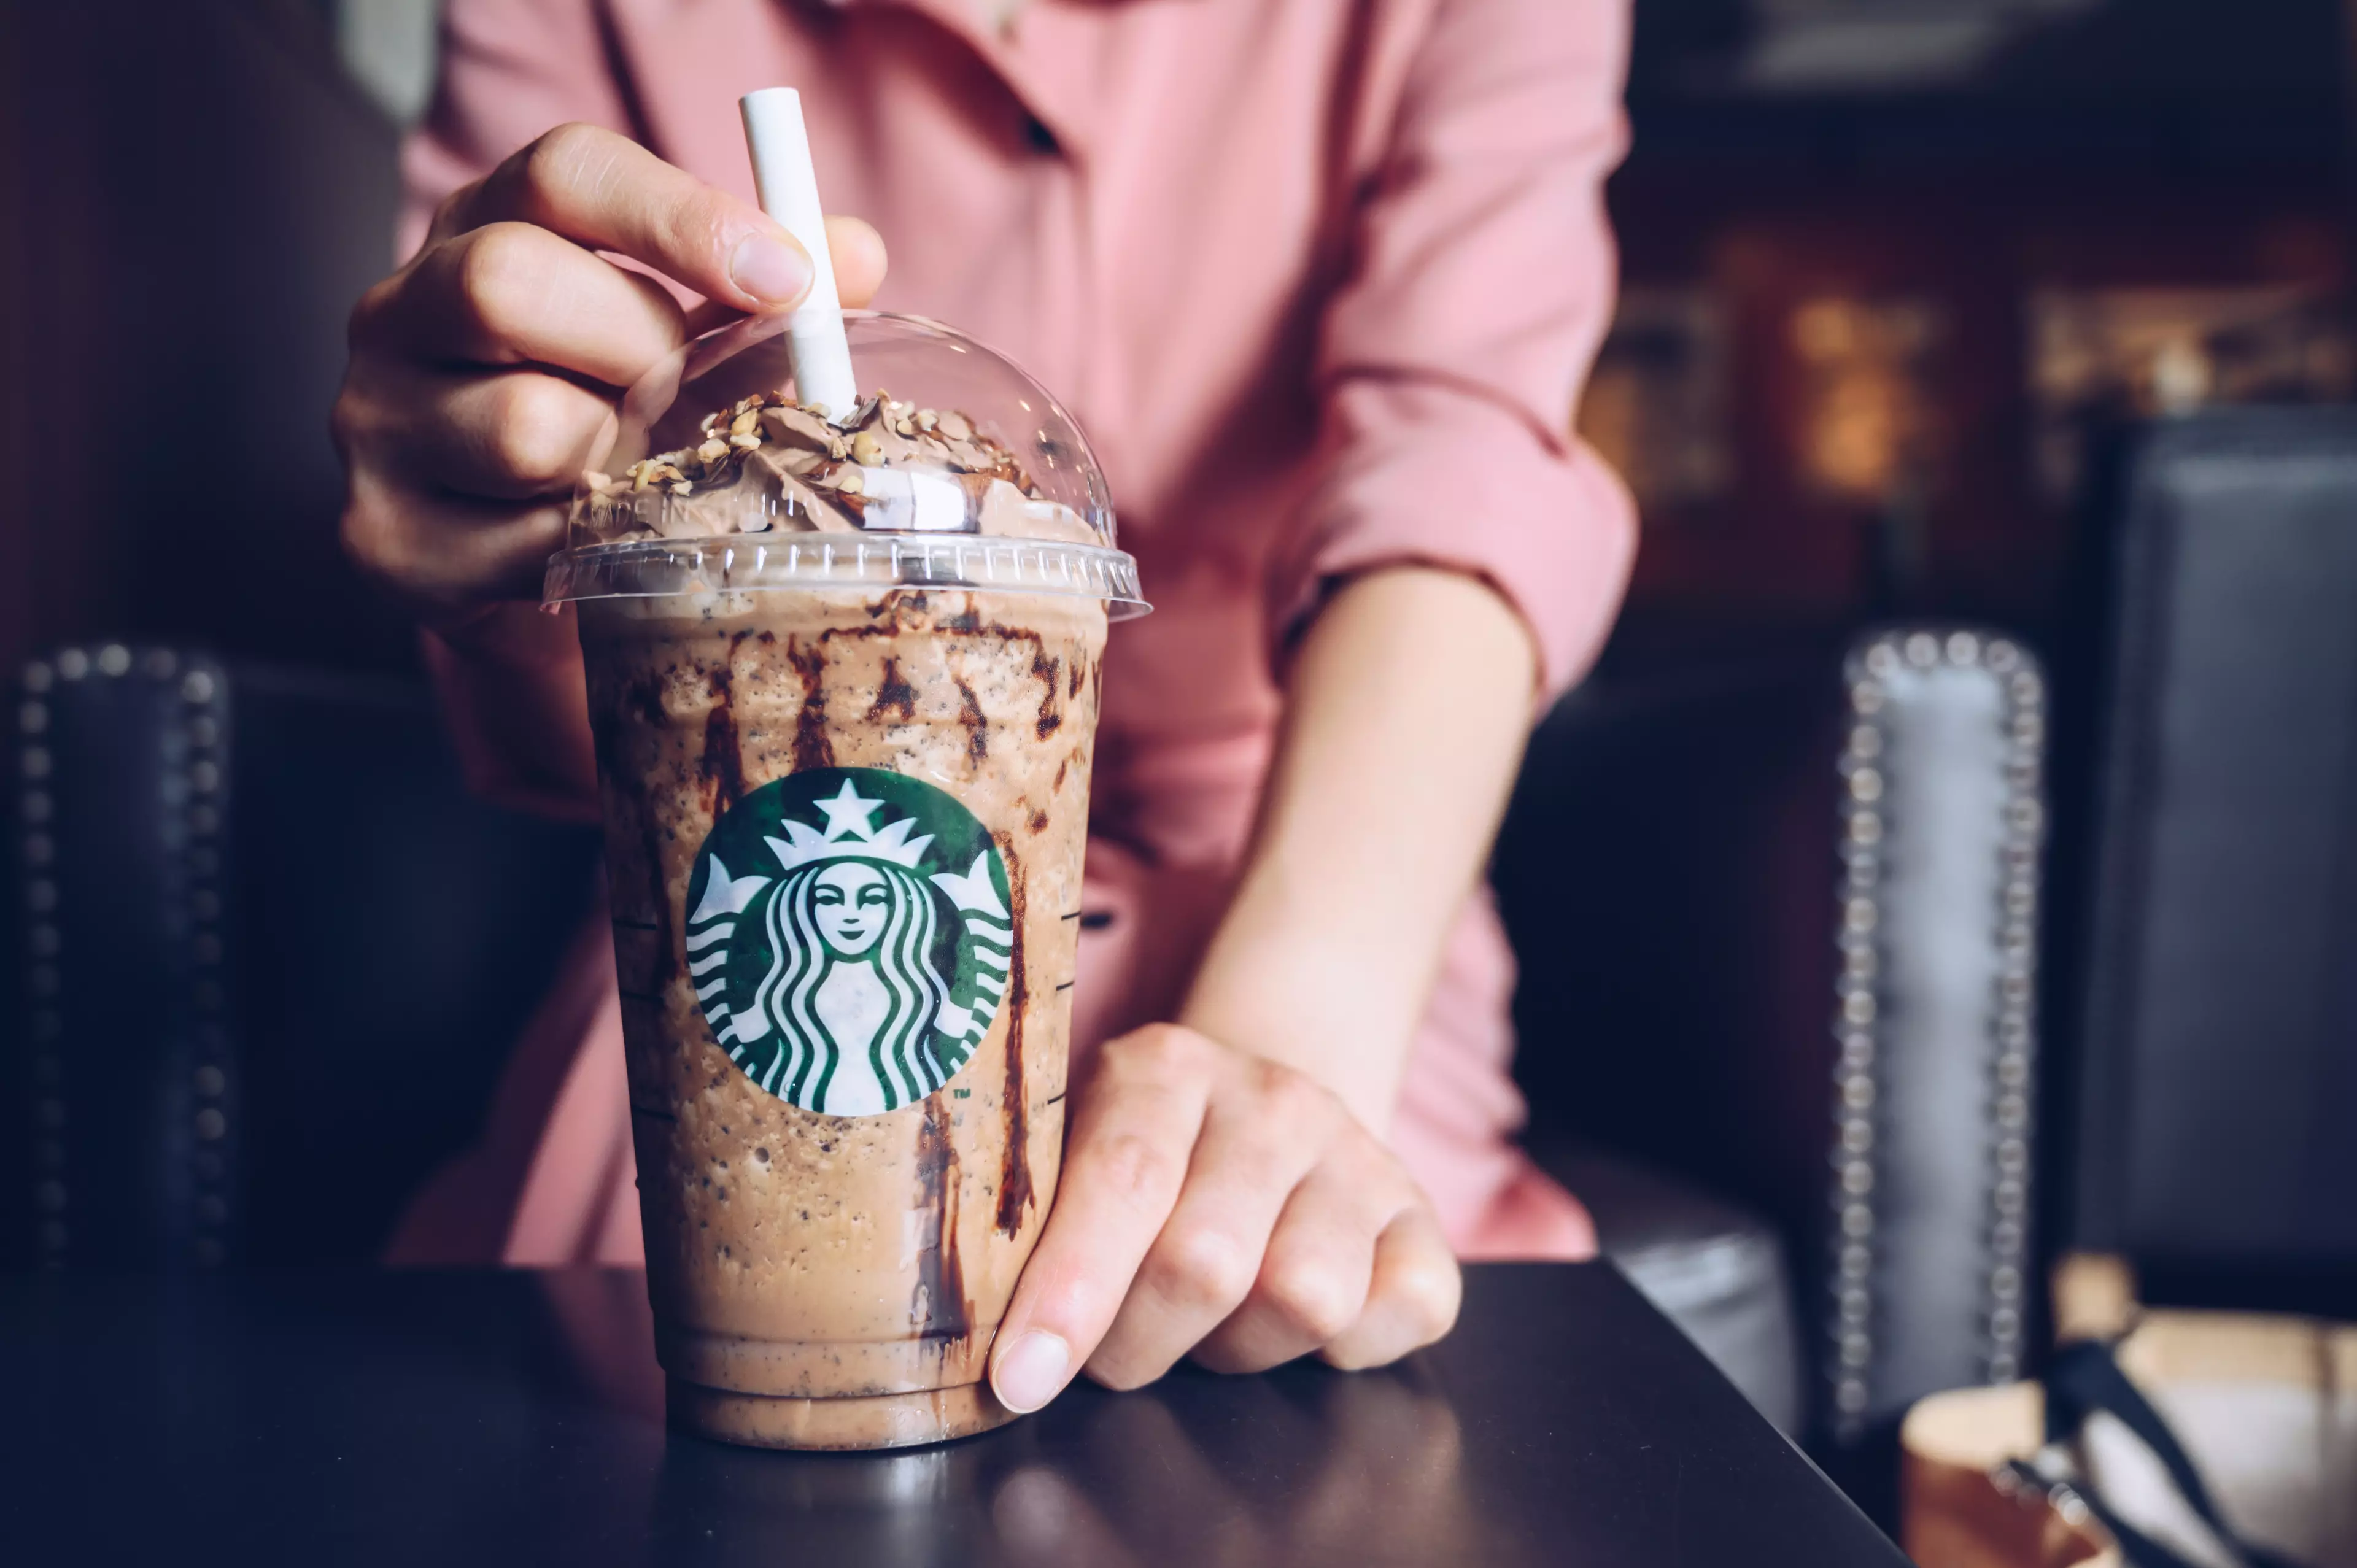 Starbucks has a whole range of frappuccinos for you to try this spring, including the classic java chip frappuccino (